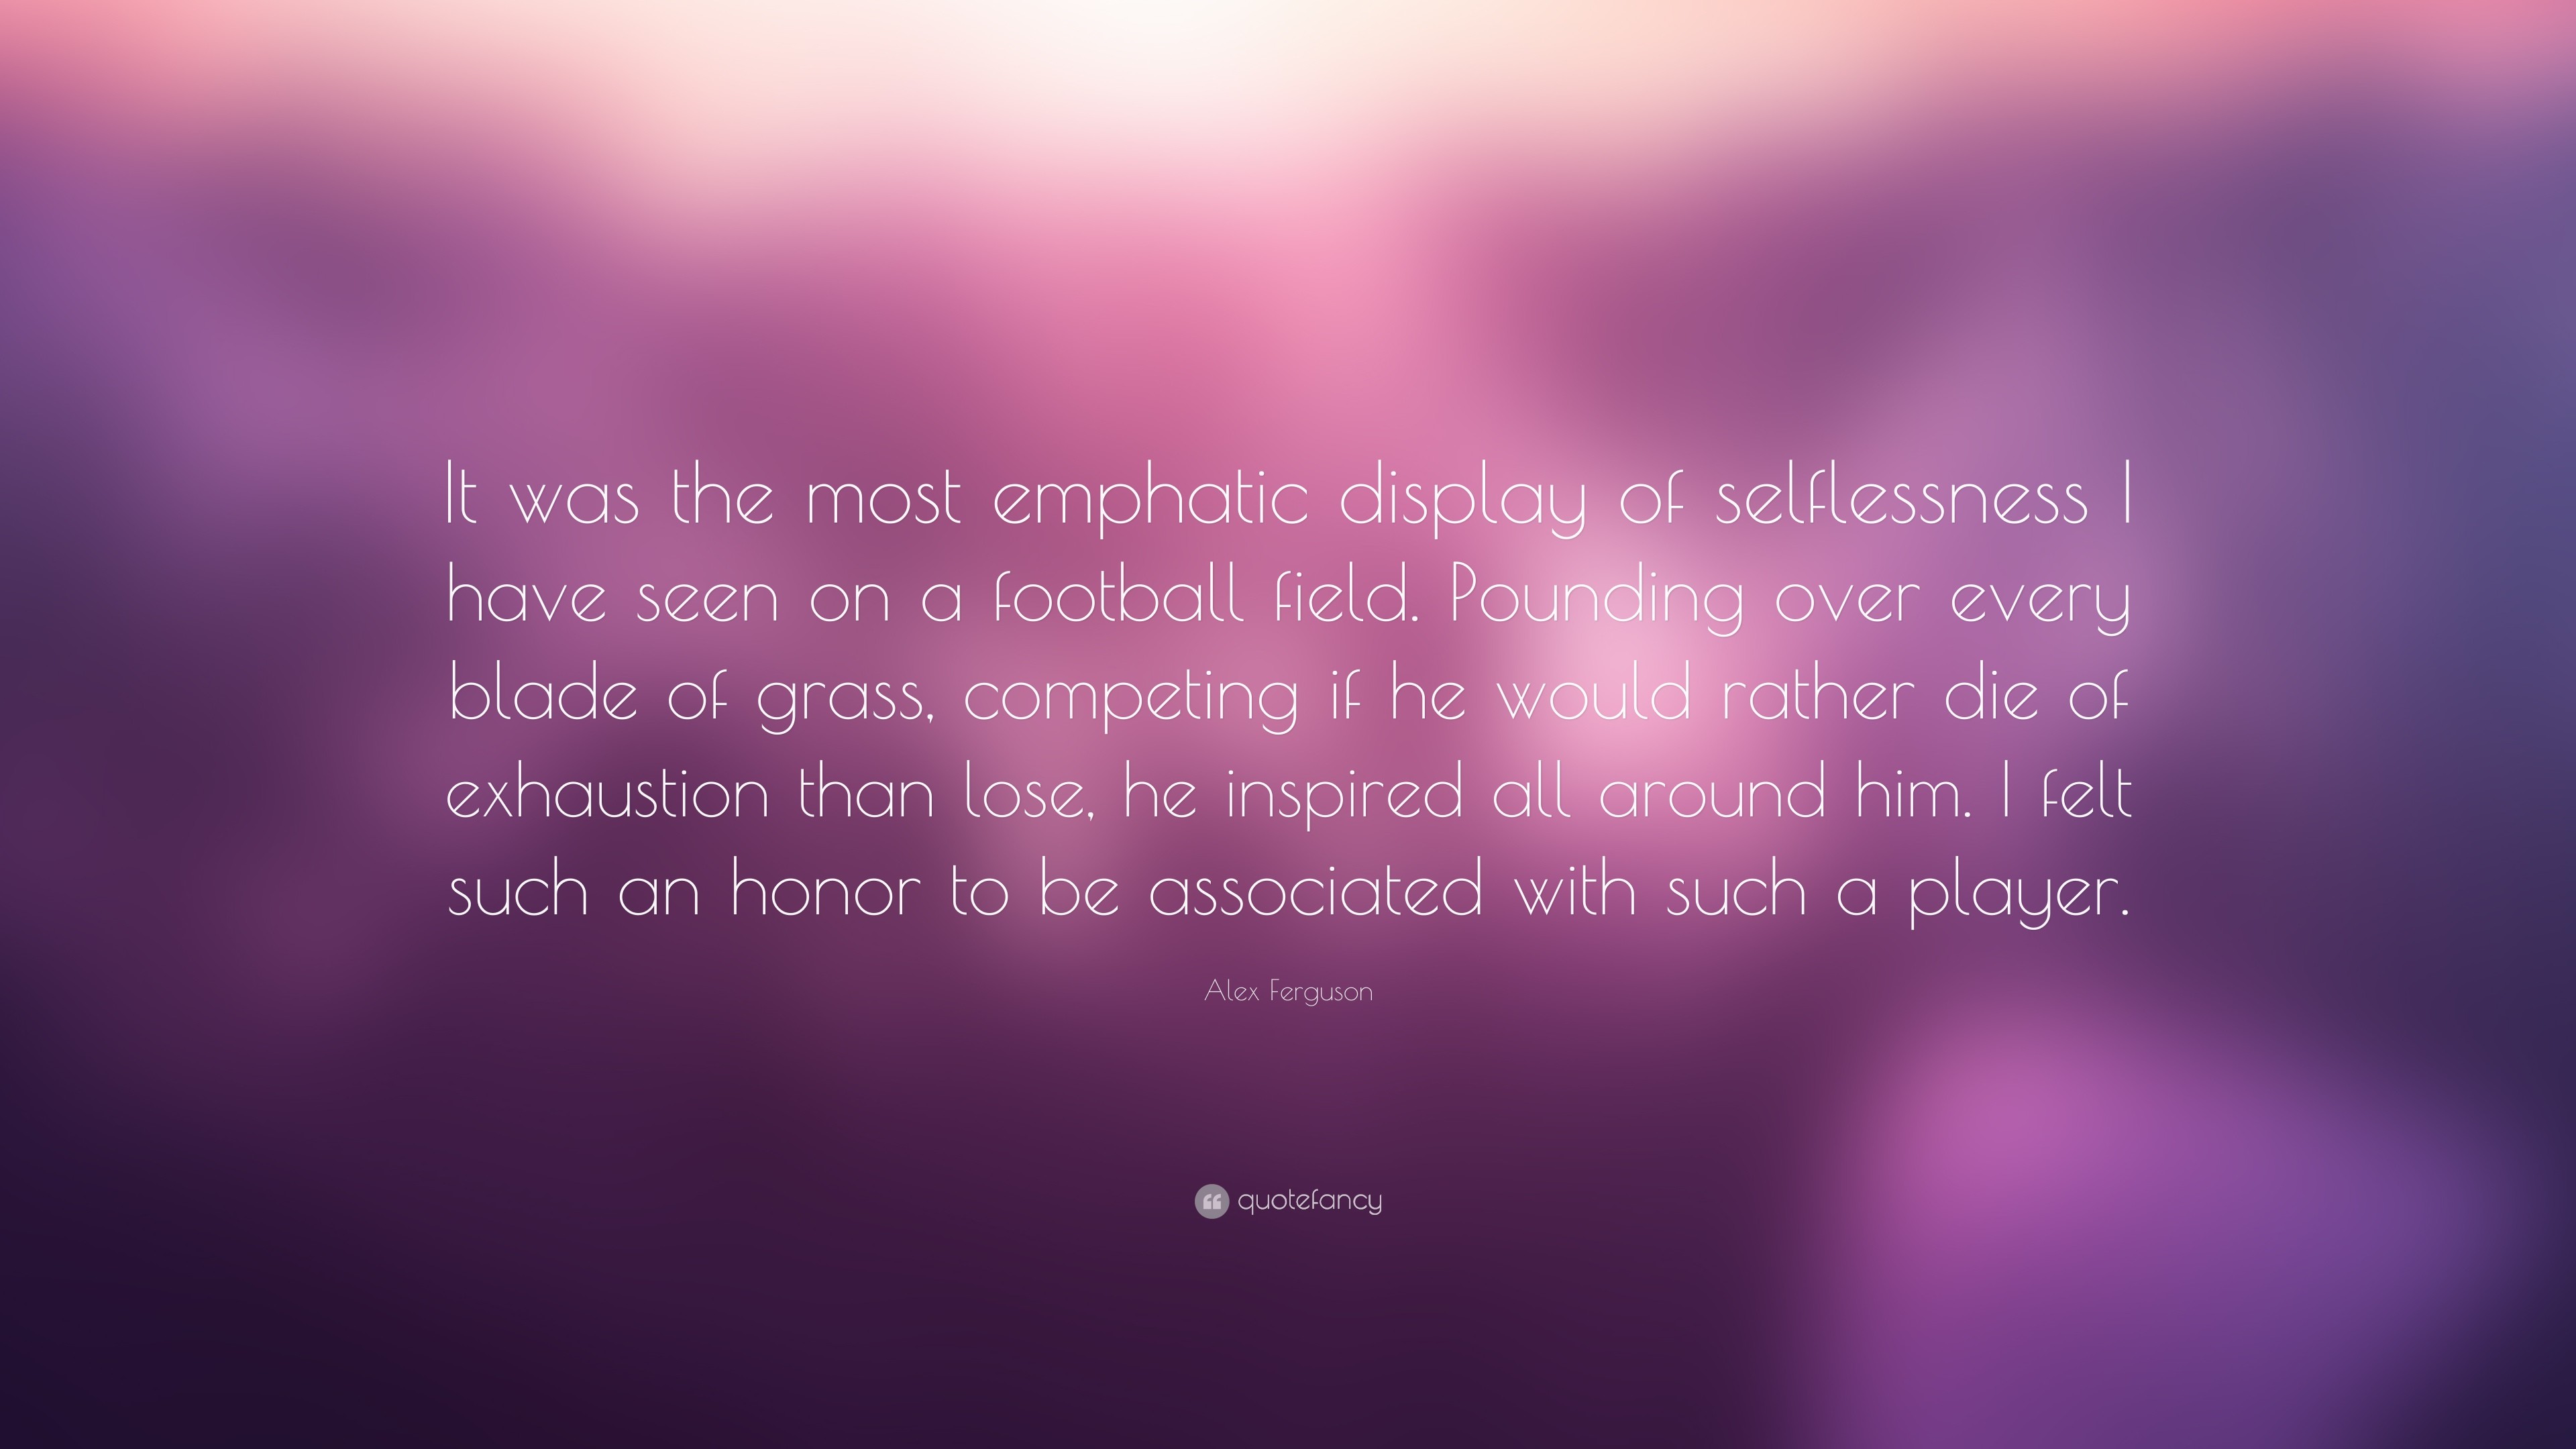 3840x2160 Alex Ferguson Quote: “It was the most emphatic display of selflessness I  have seen